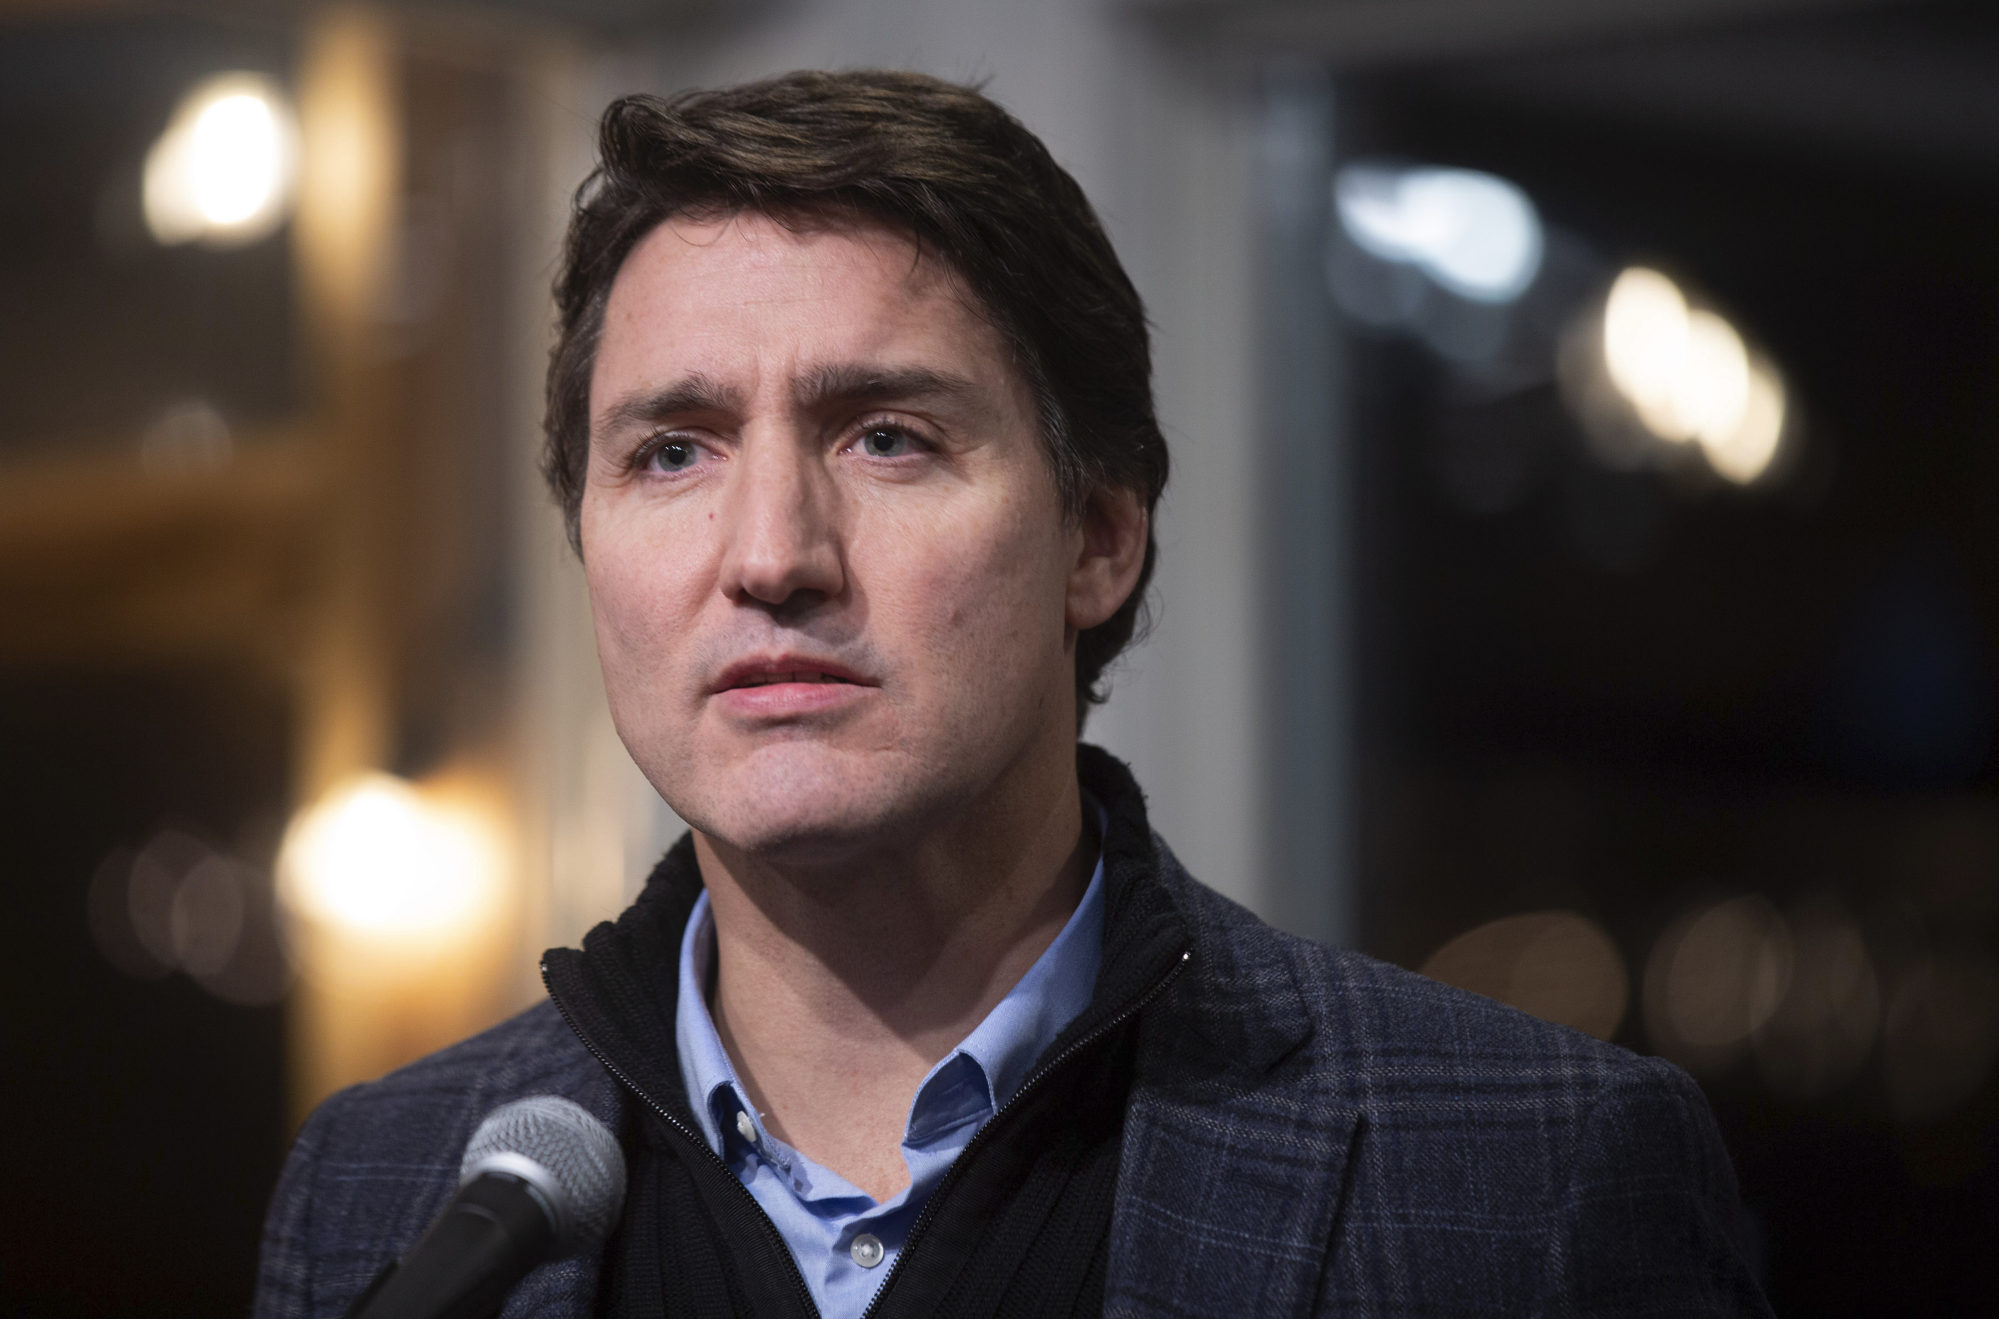 jewish community centre firebombed in montreal; trudeau decries ‘vile and hateful’ act